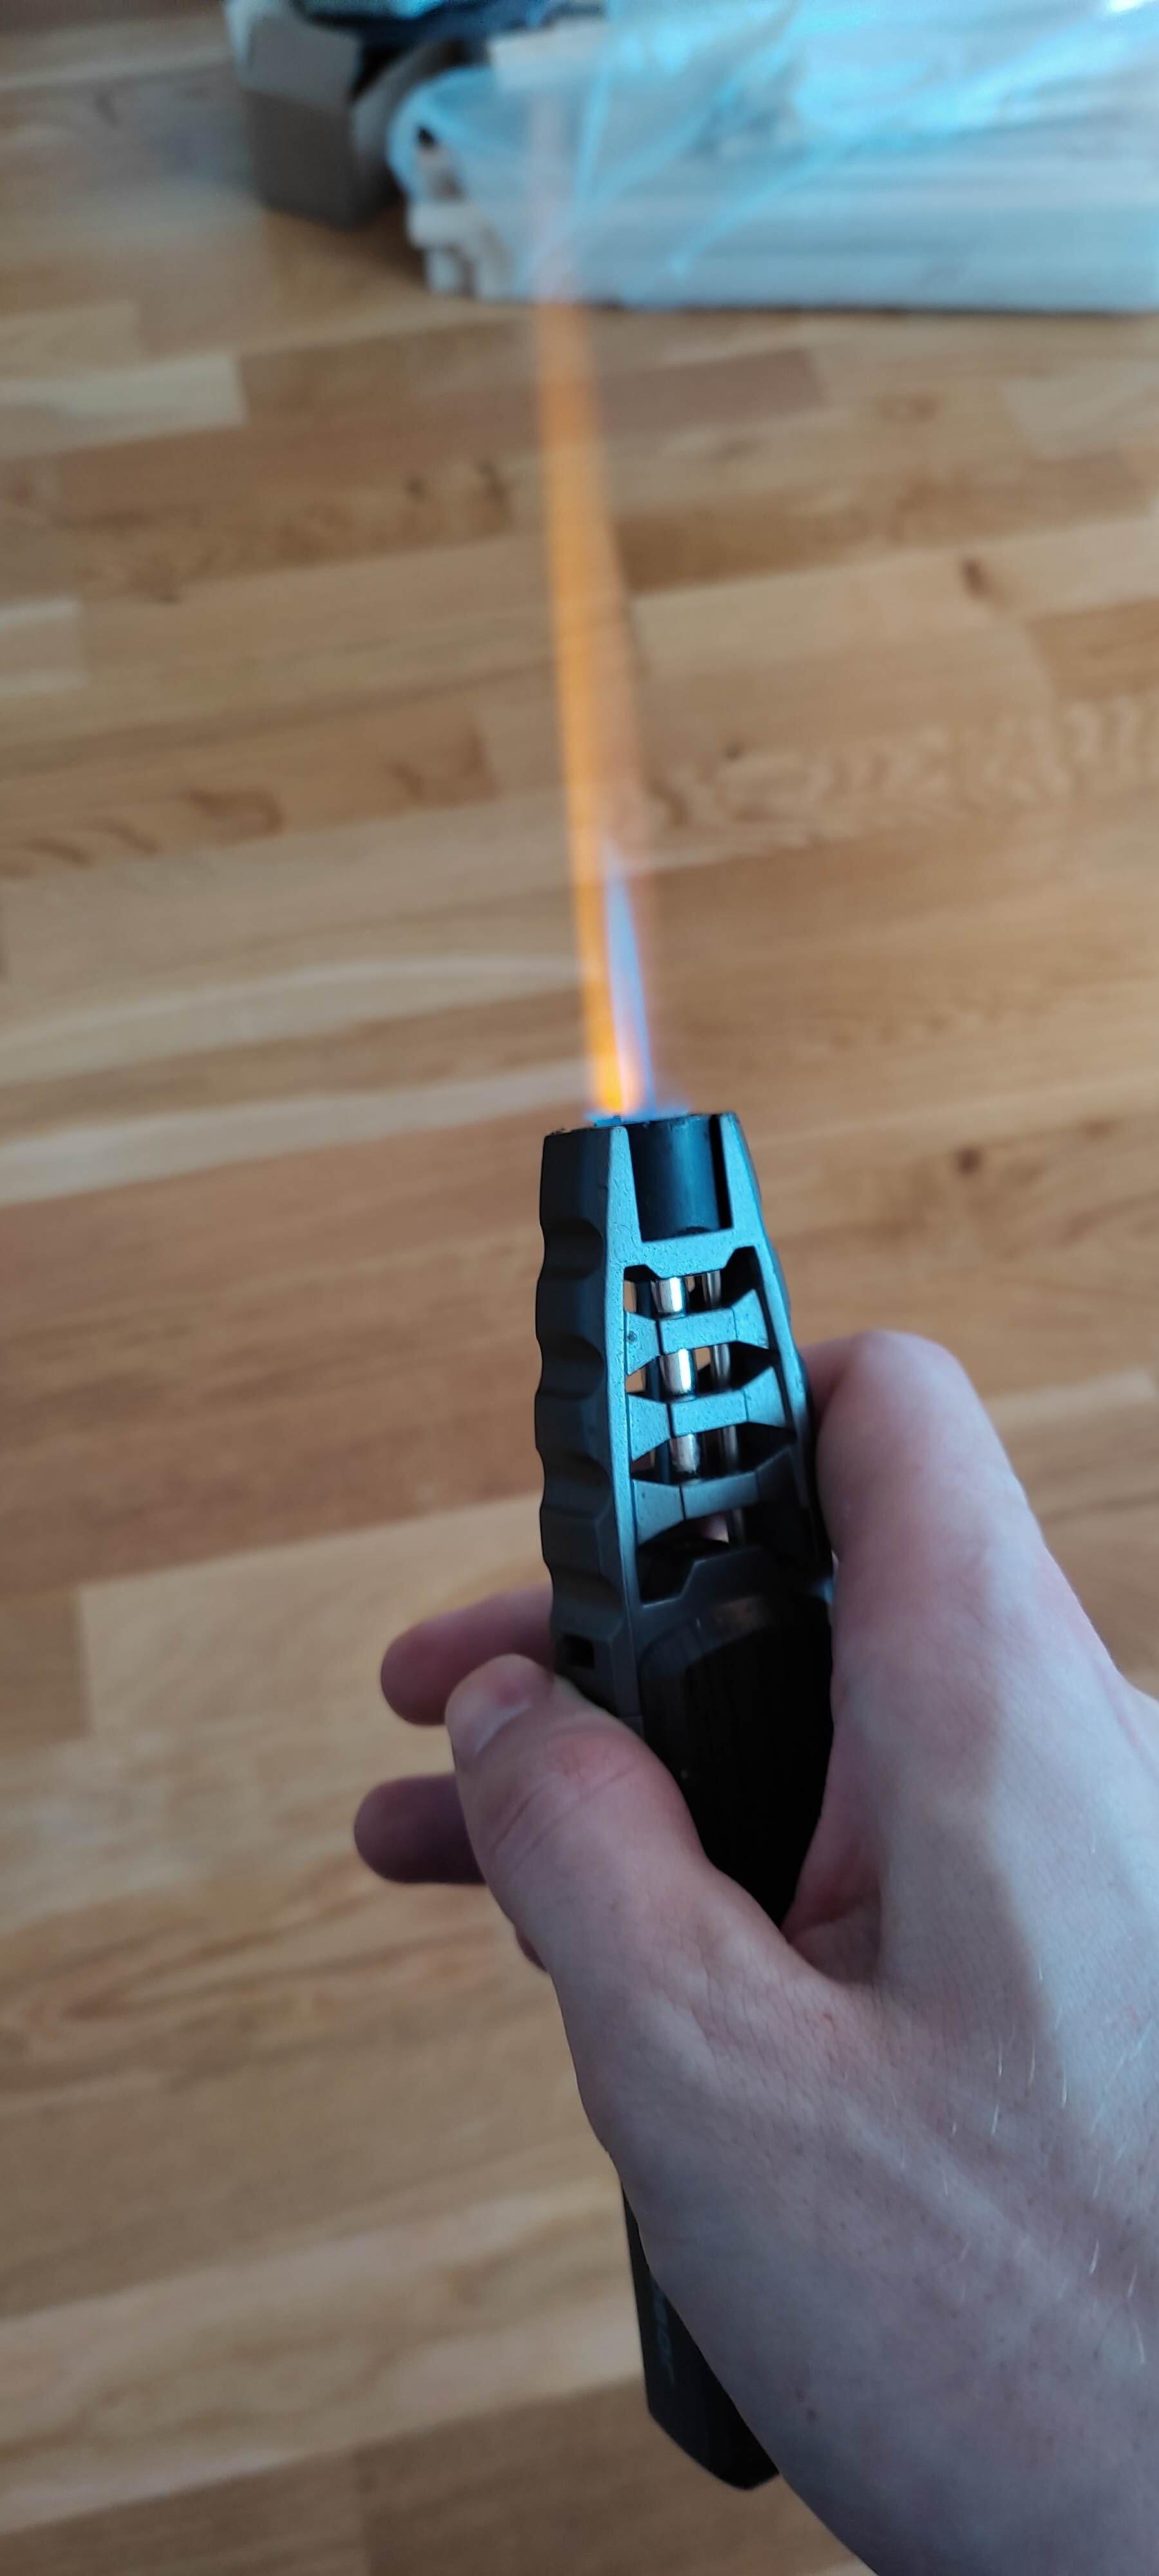 Jet Flames Lighter Turbo Torch Fire Gas Lighters | Plus photo review